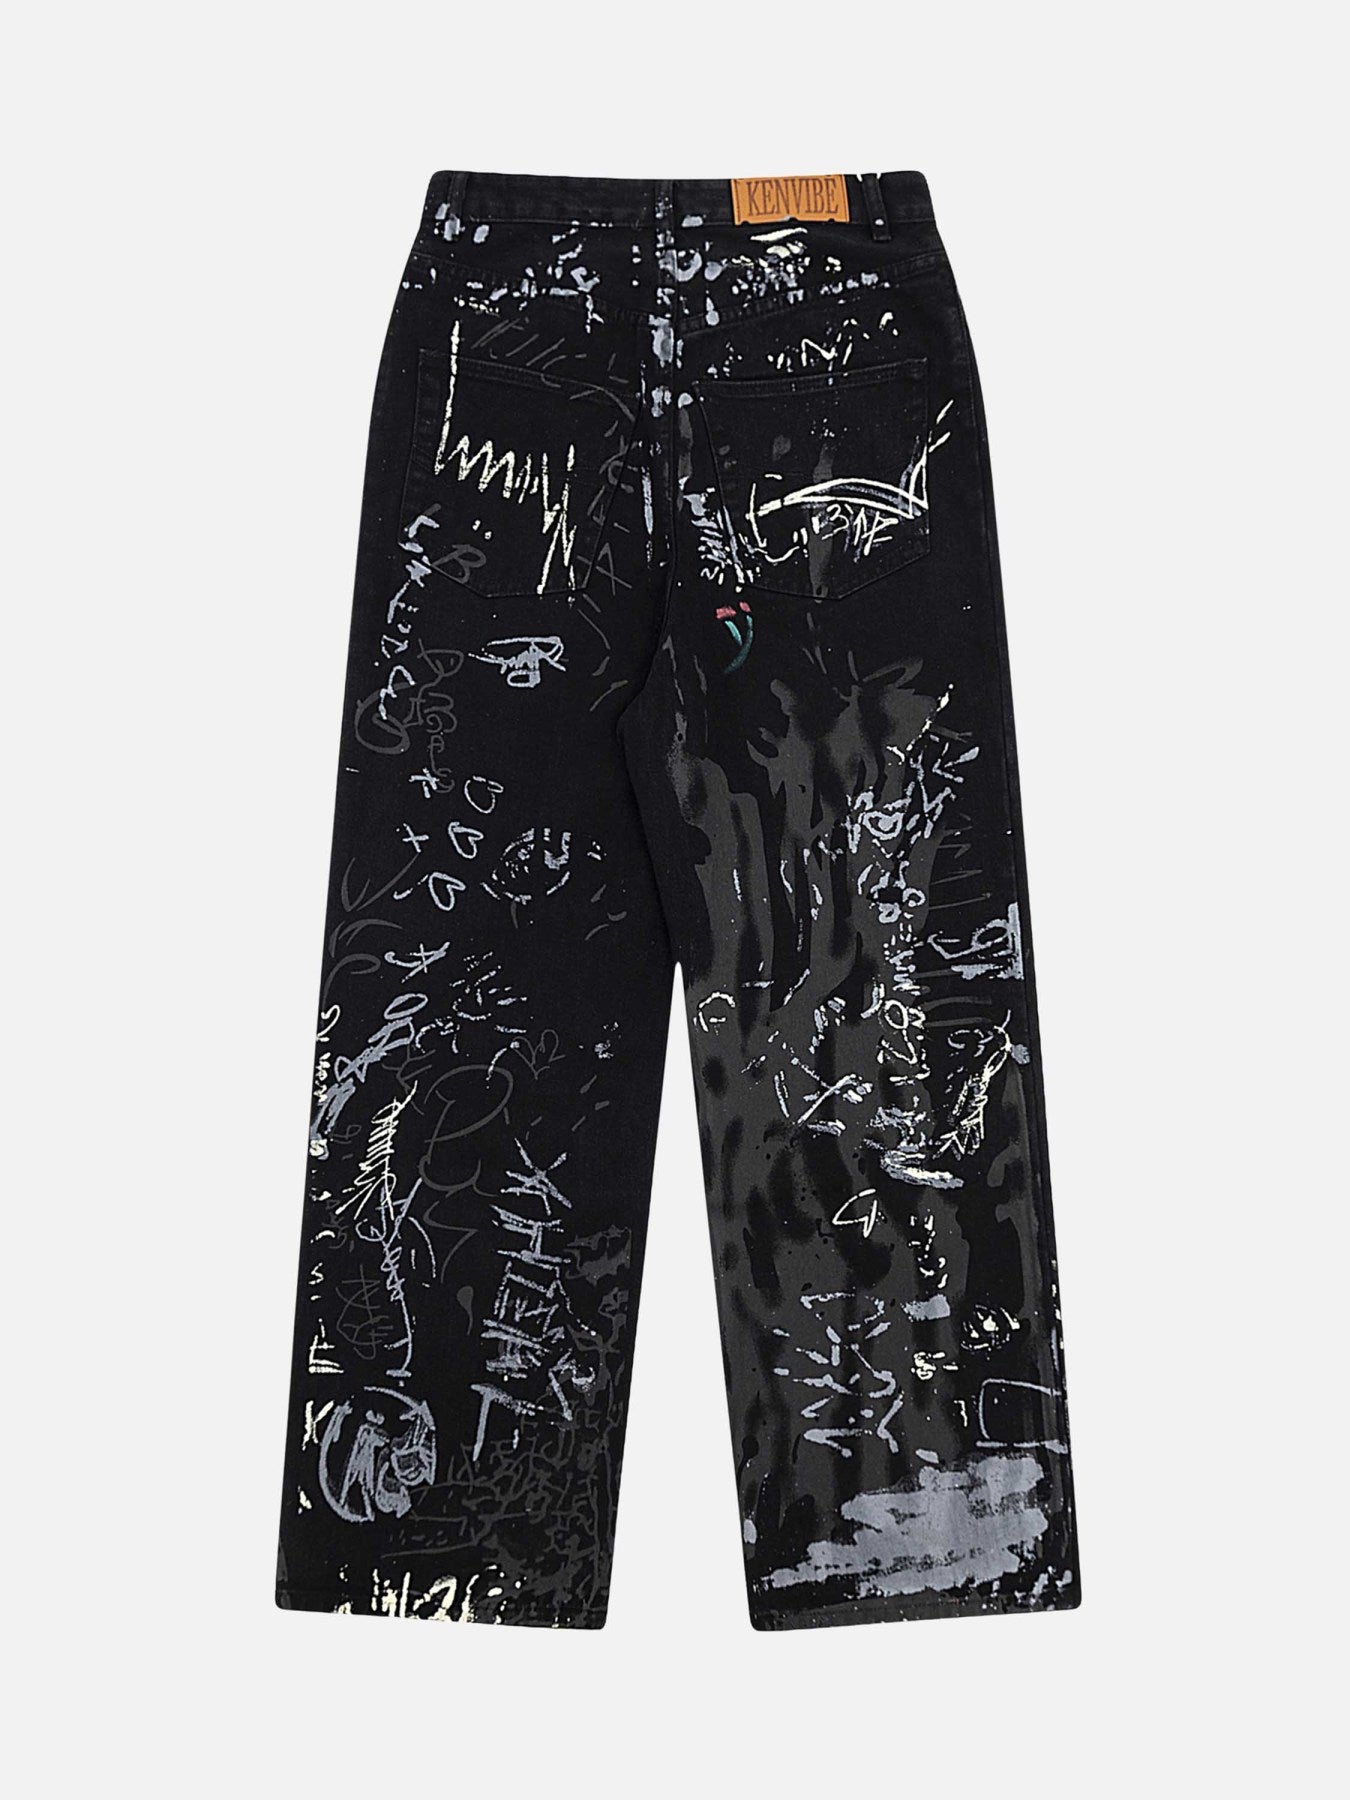 Thesupermade American Graffiti Letter Print Jeans - 1914